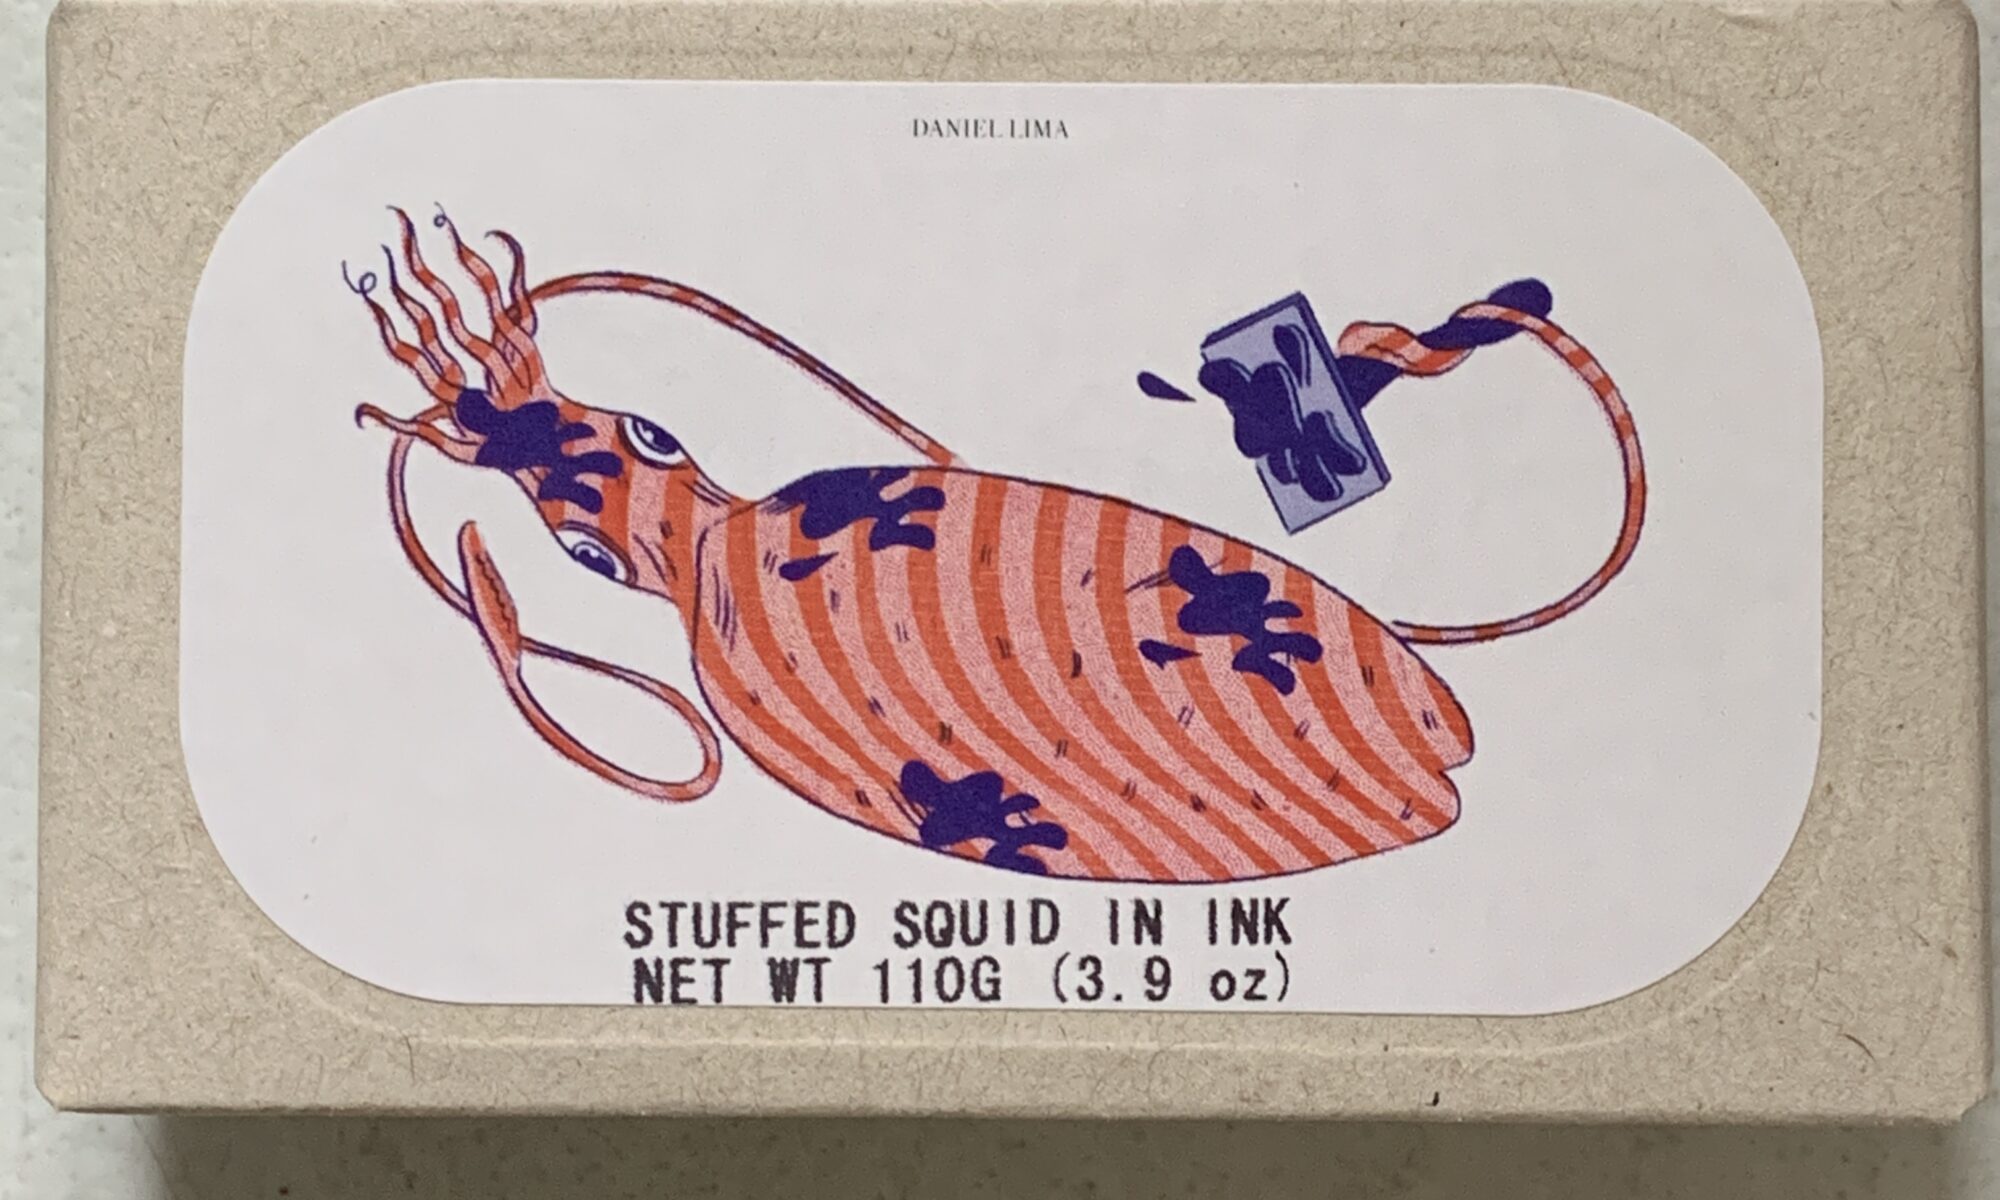 Image of the front of a package of José Gourmet Stuffed Squid in Ink